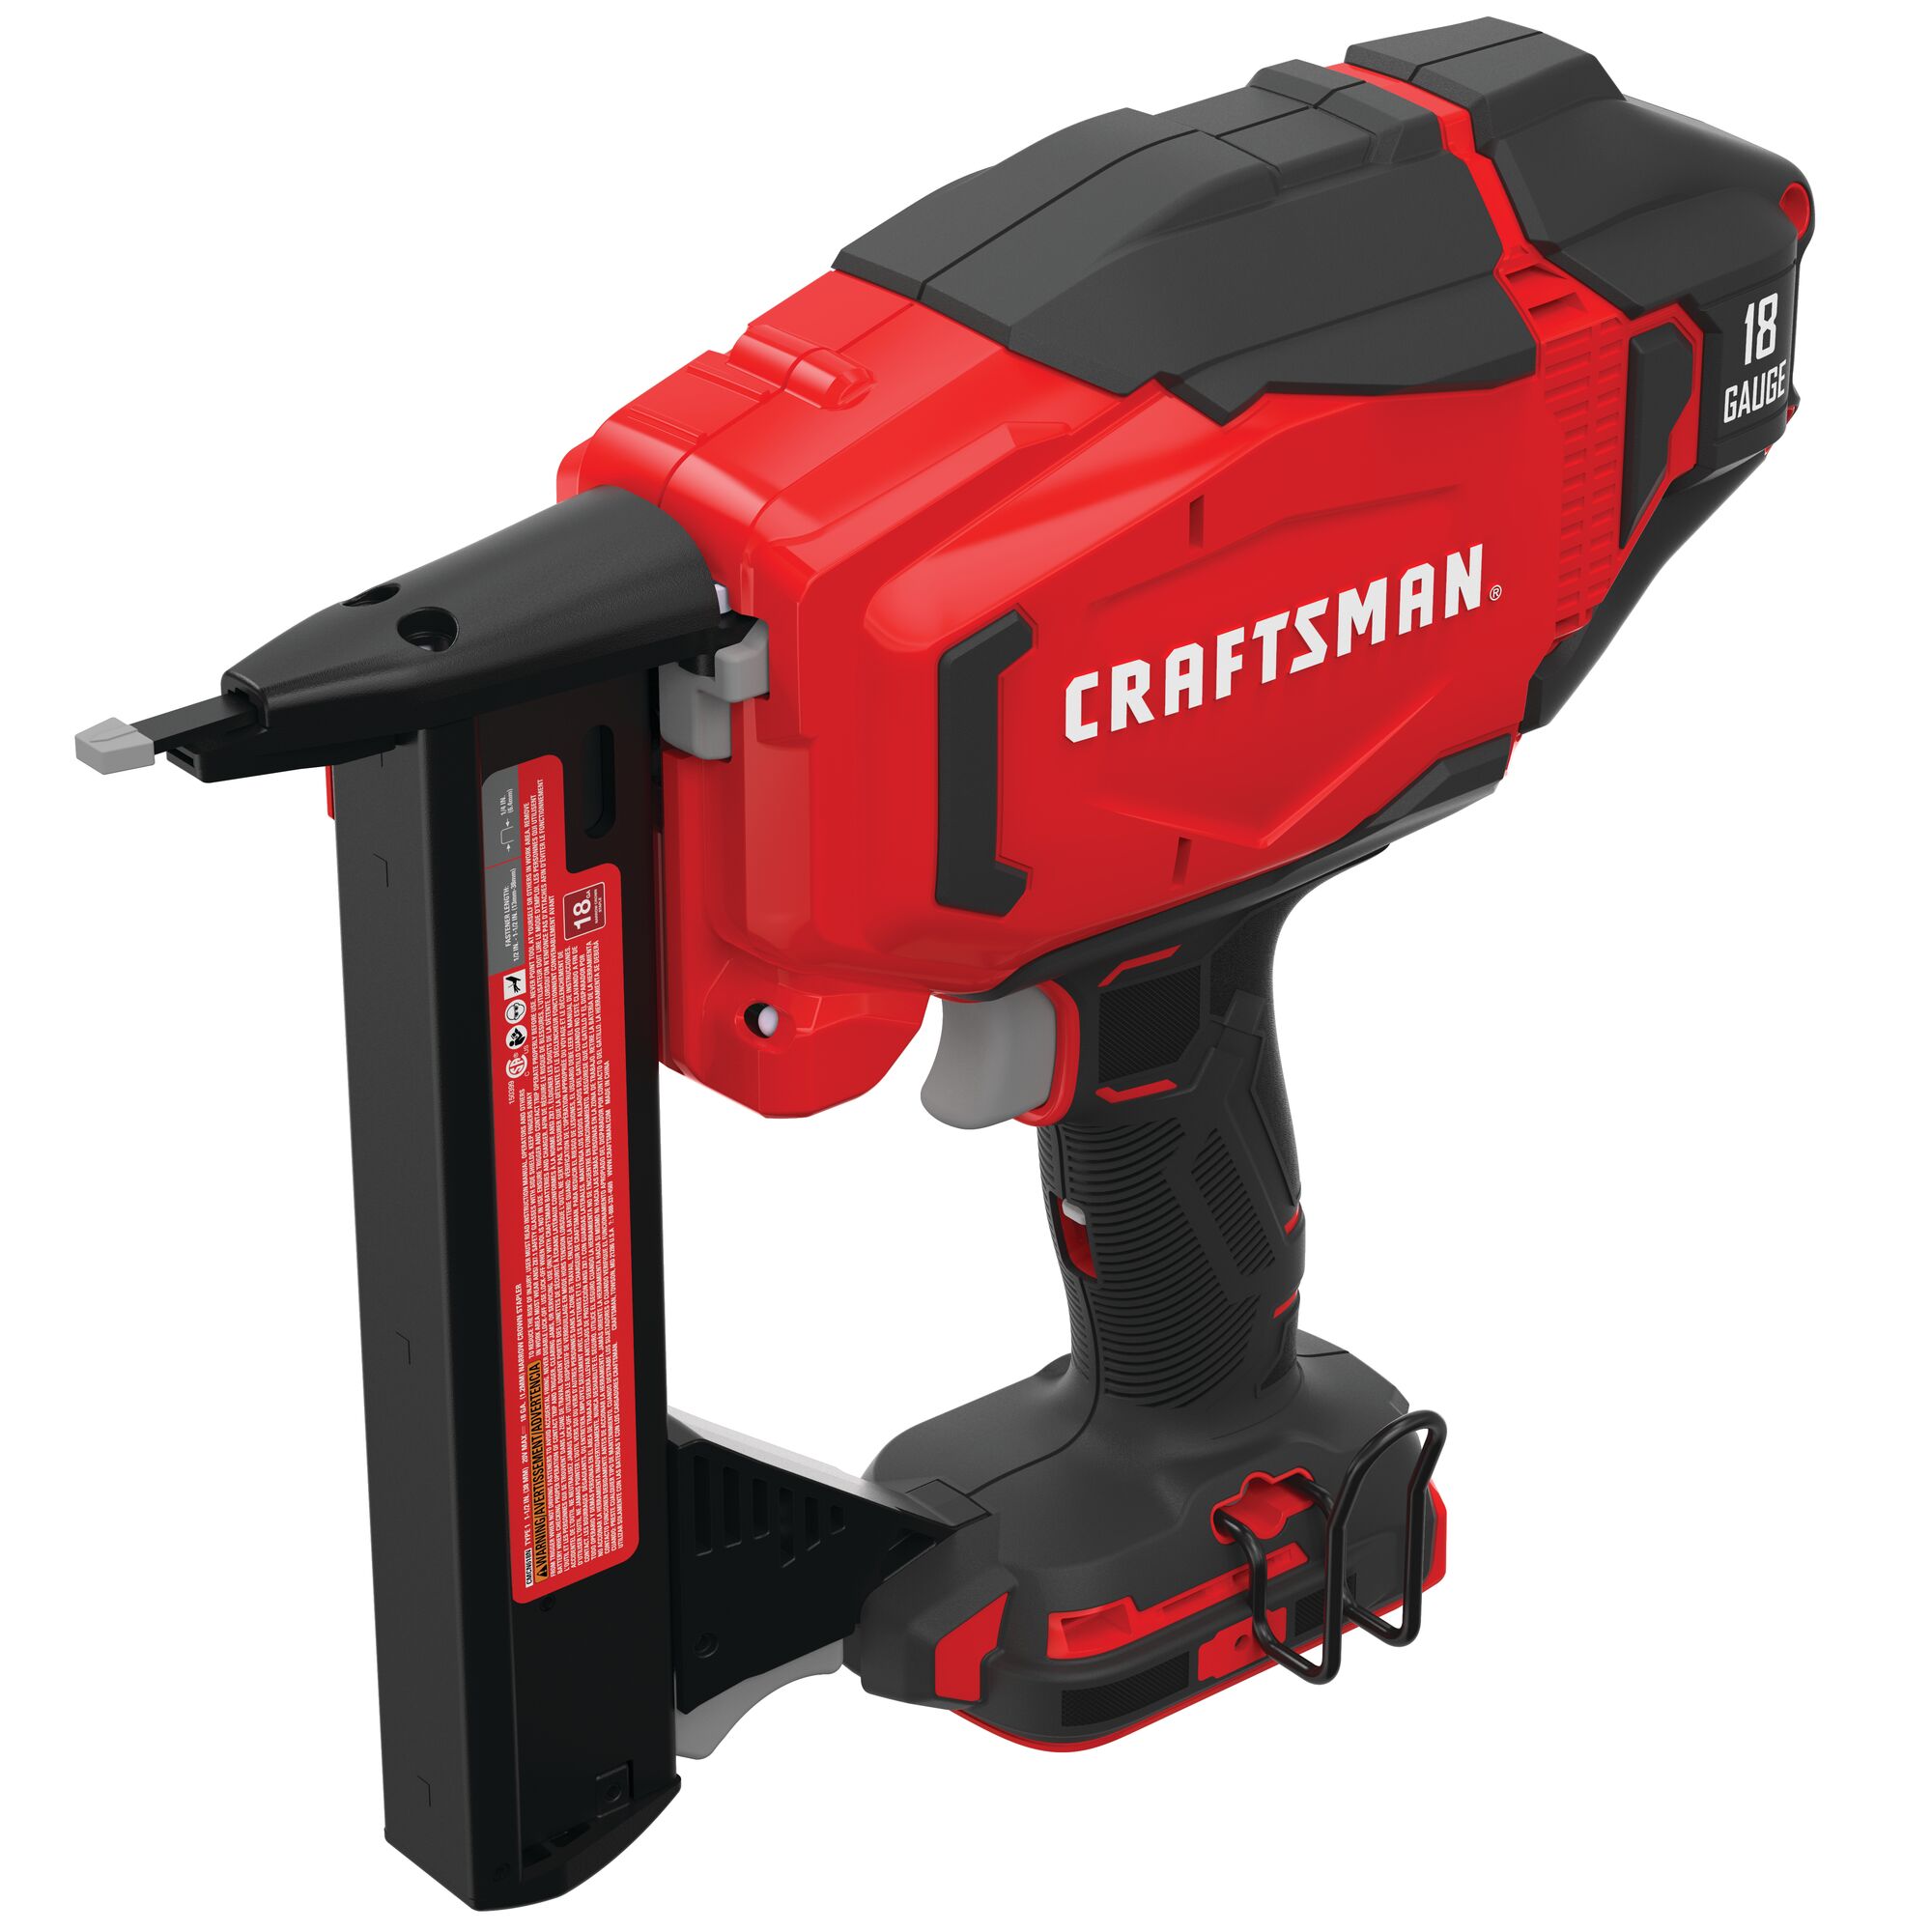 View of CRAFTSMAN Stapler on white background